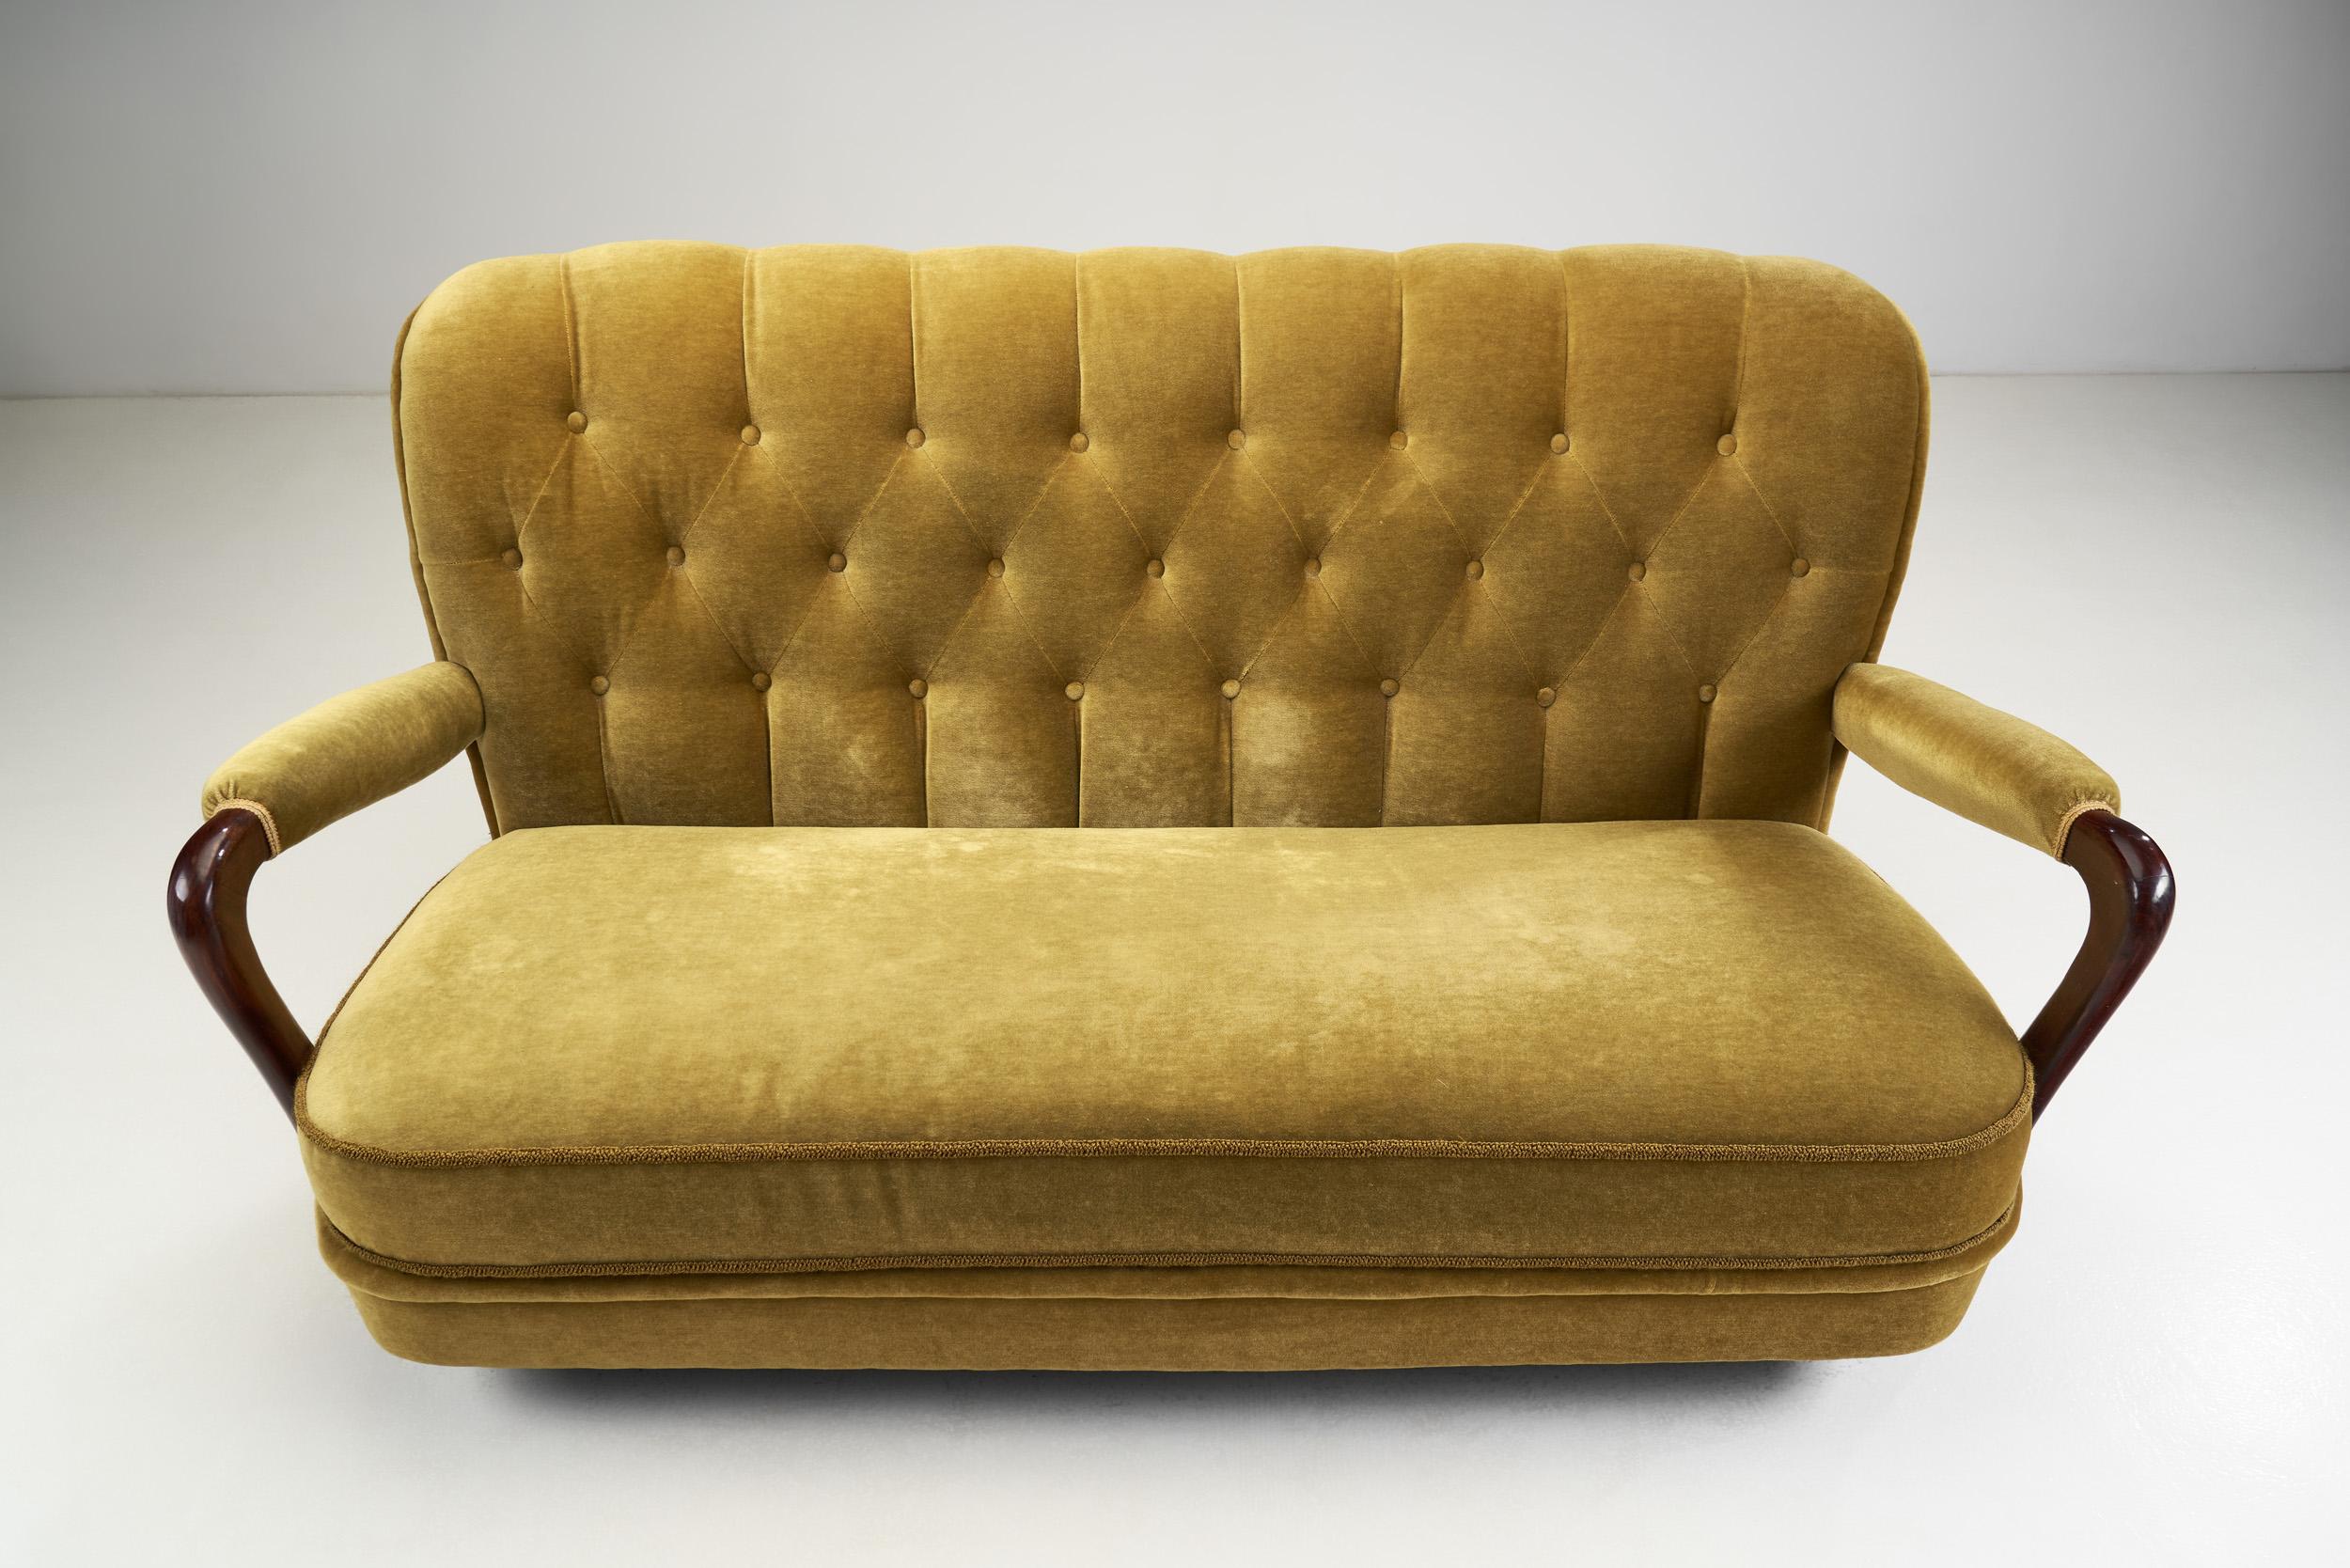 Swedish Modern Two-Seater Sofa, Sweden 1940s For Sale 2